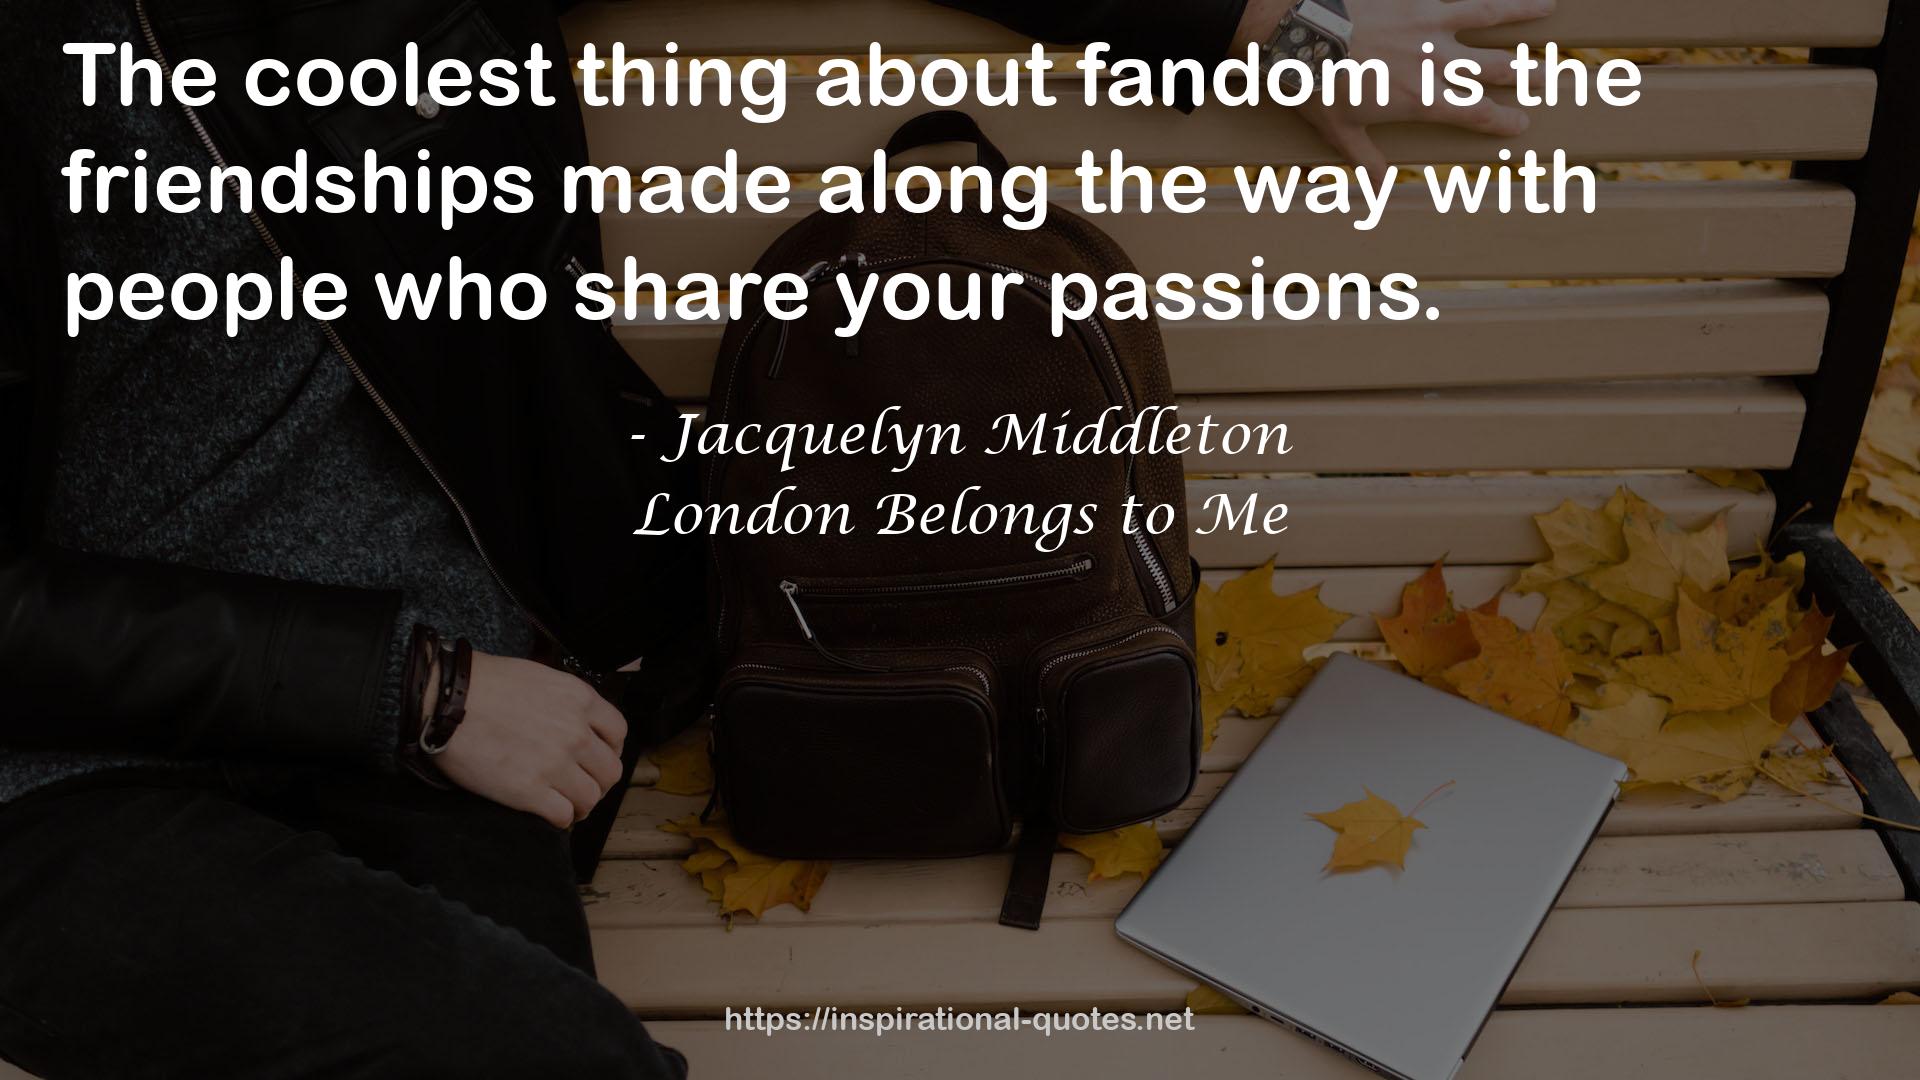 Jacquelyn Middleton QUOTES